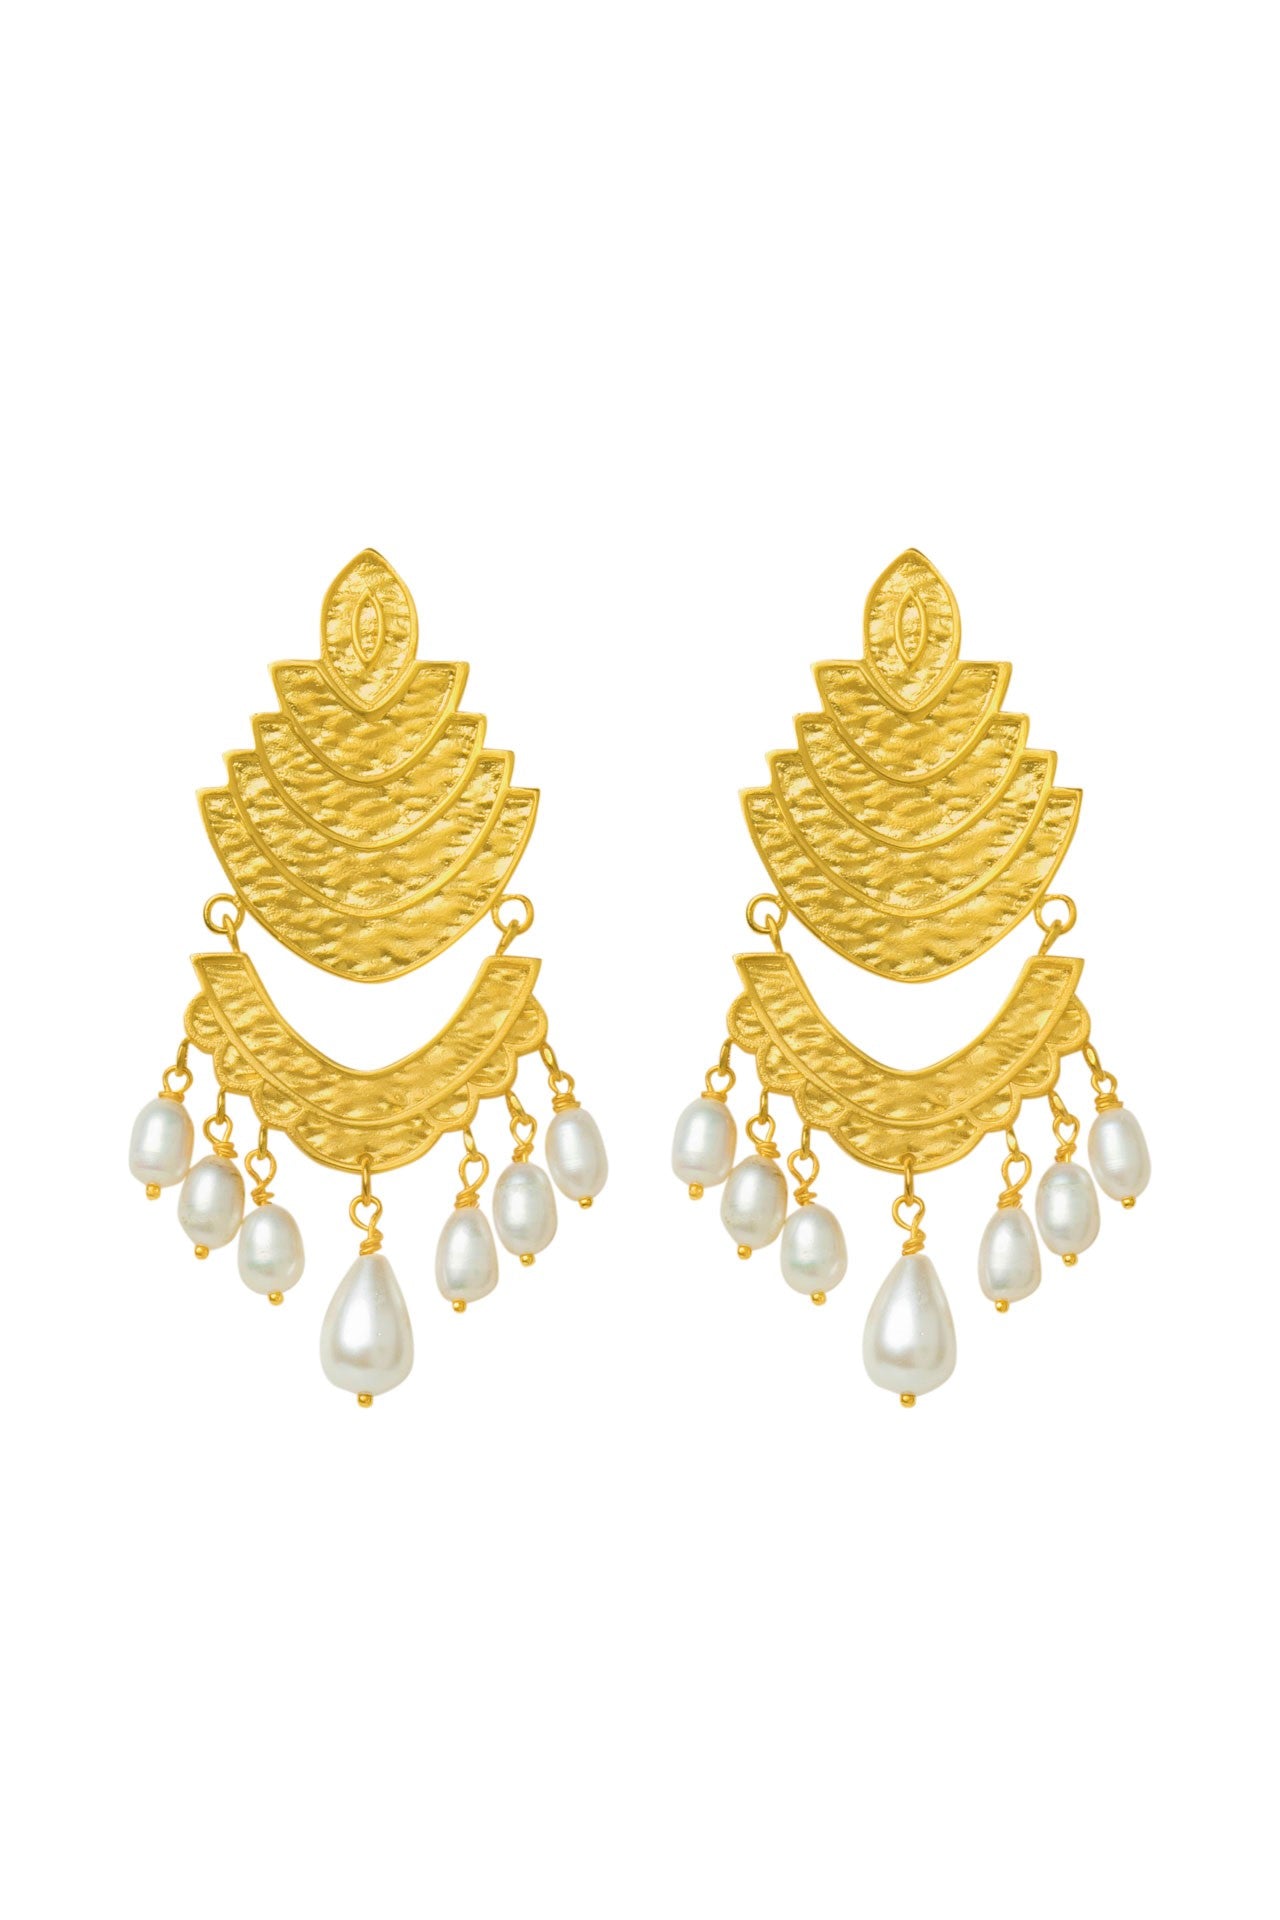 Christy pearl earrings by Pearl Martini